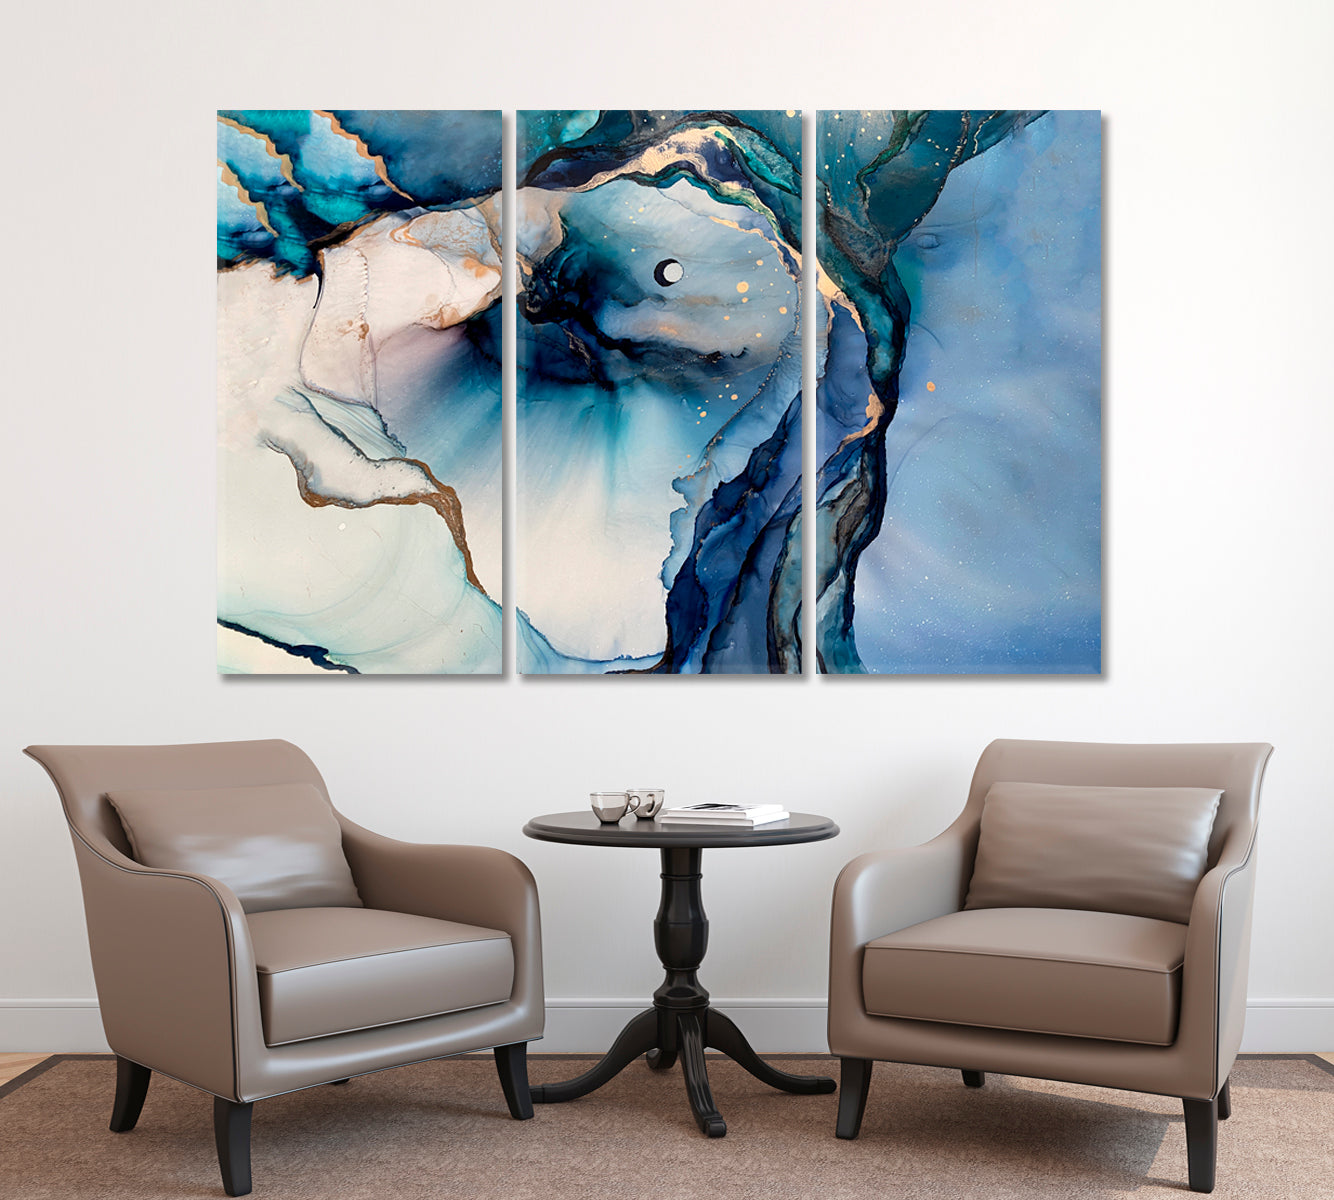 ABSTRACT CLOUDS Marble Blue Trendy Contemporary Fluid Poster Fluid Art, Oriental Marbling Canvas Print Artesty 3 panels 36" x 24" 